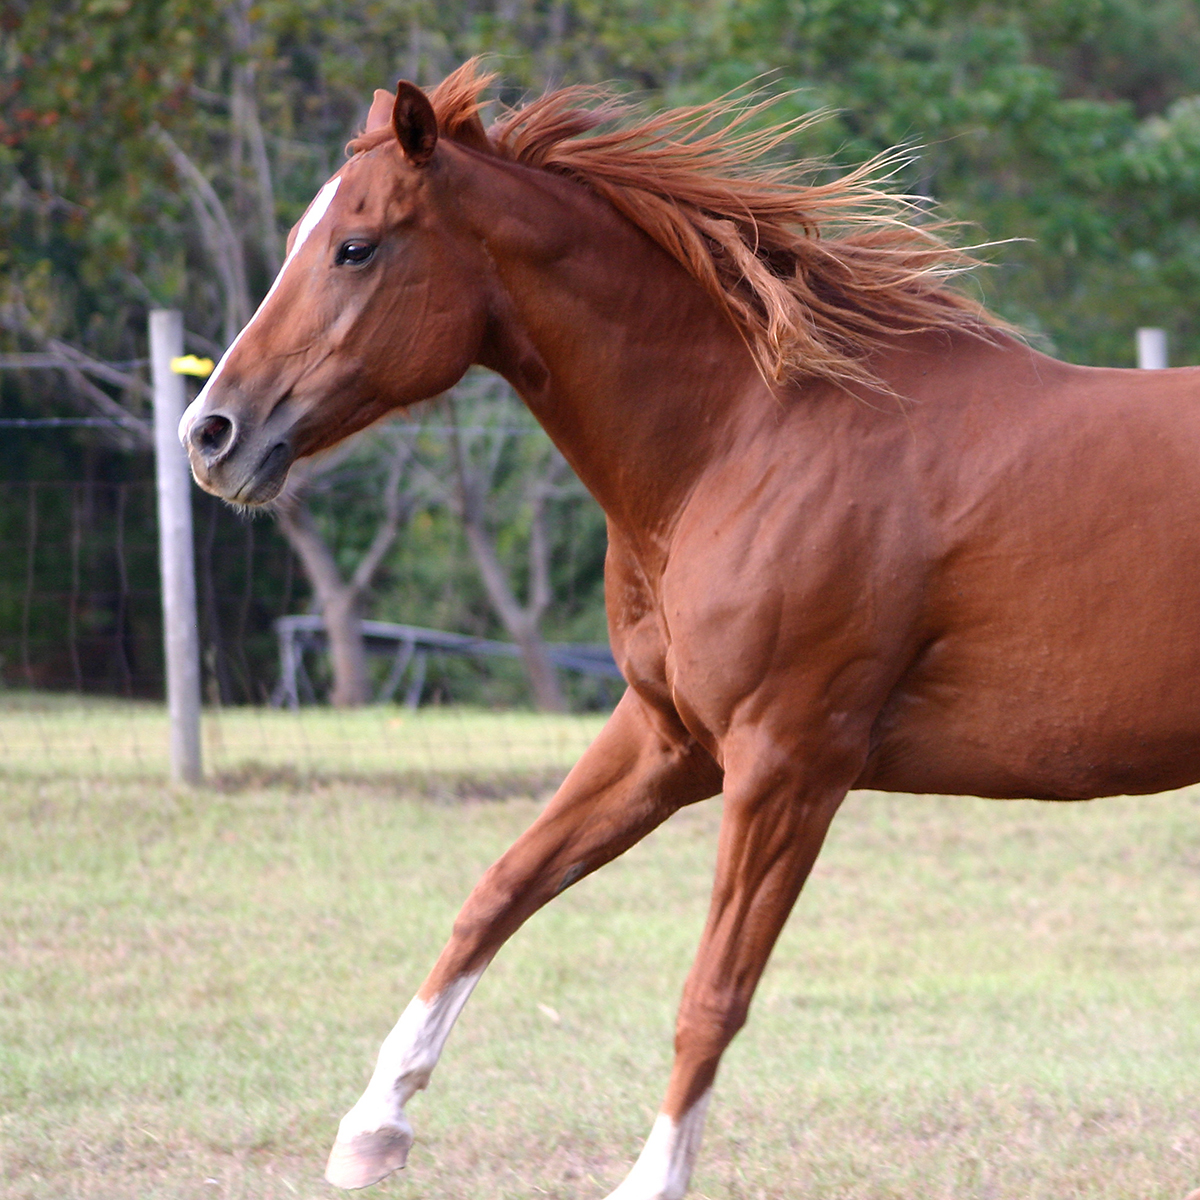 Image of a horse running